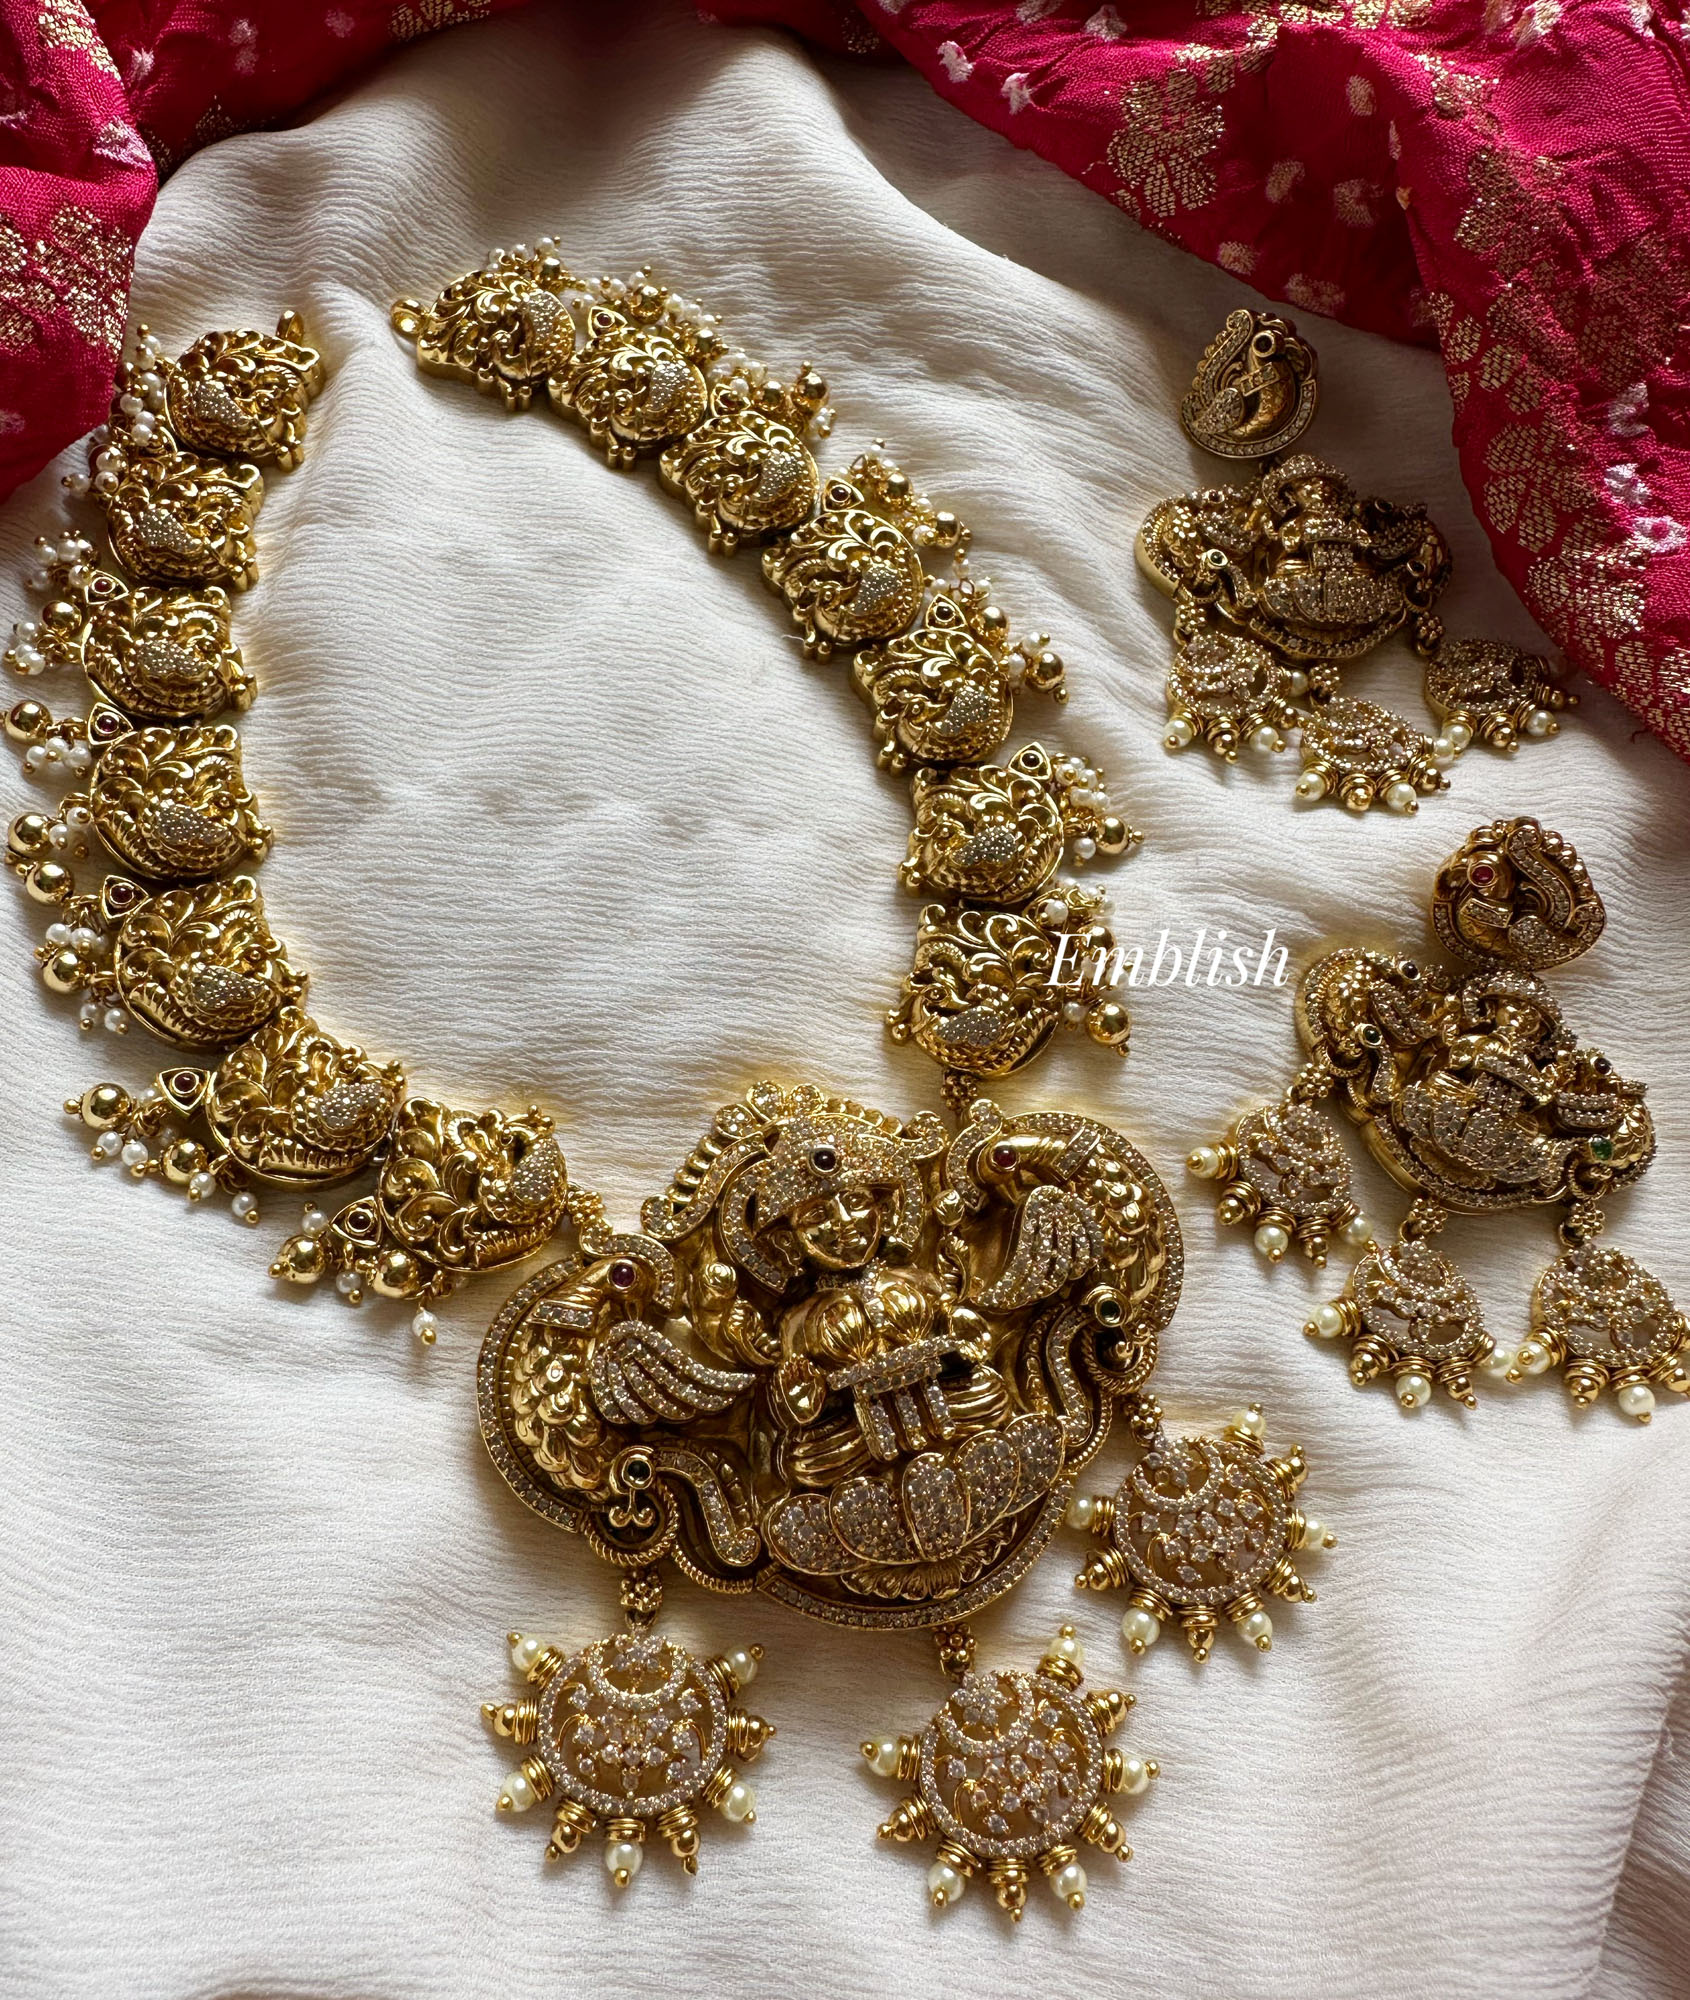 Ad Lakshmi with Double peacock intricate with Chakra Drop Neckpiece